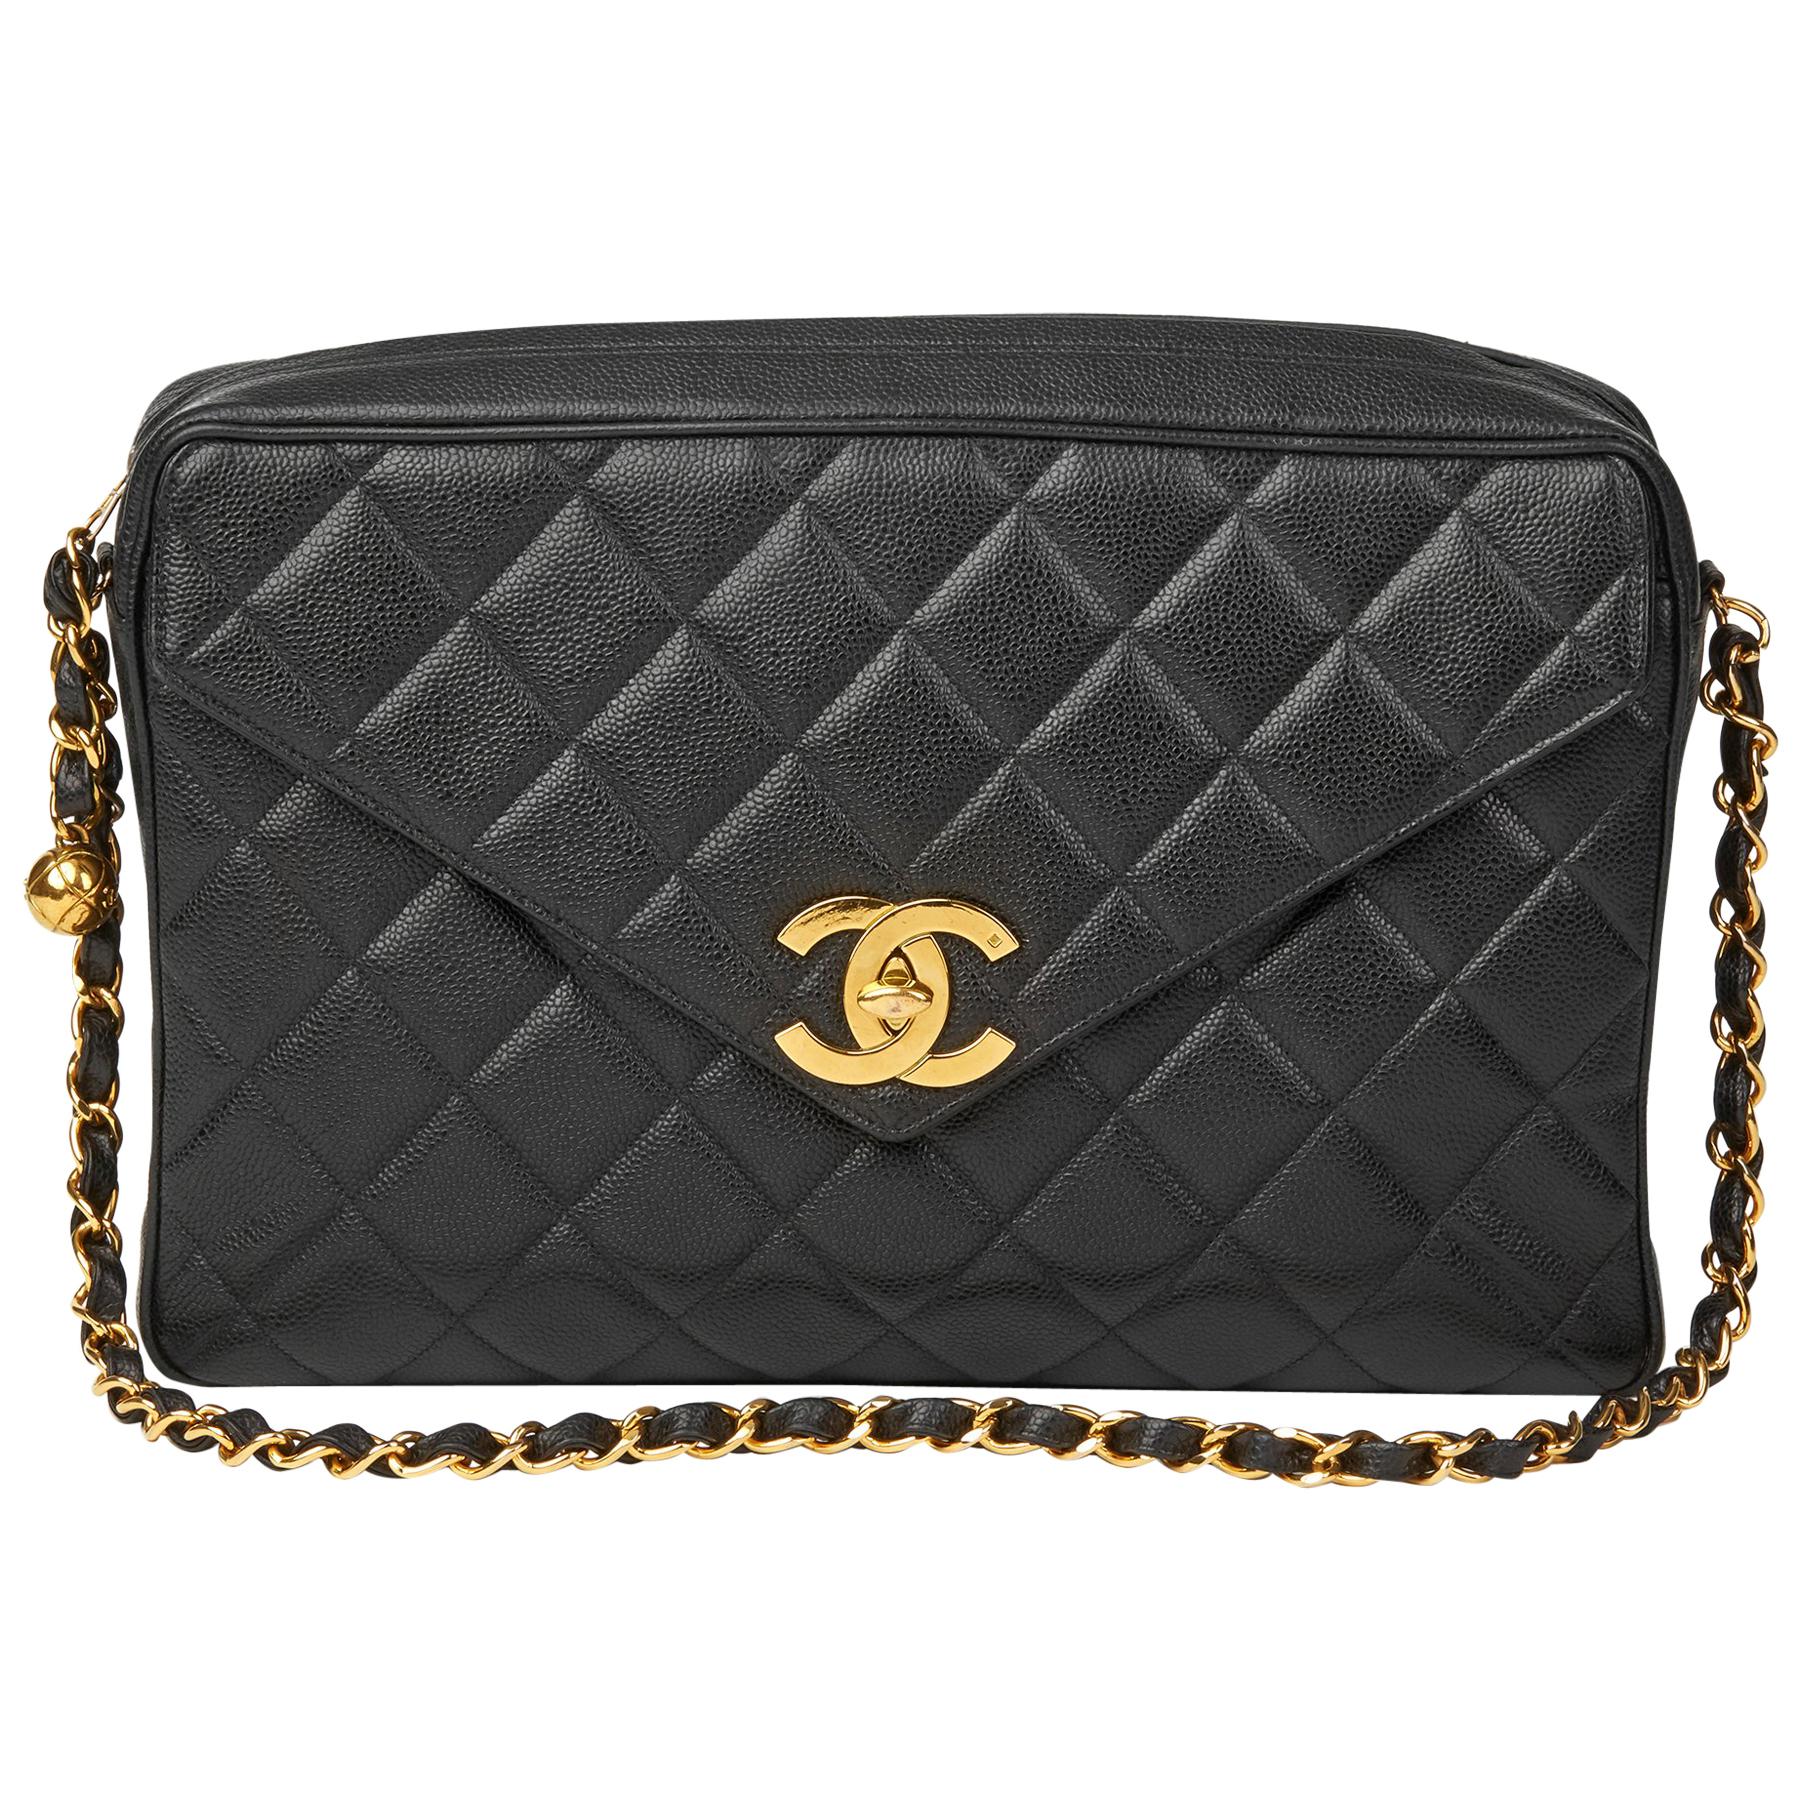 1994 Chanel Black Quilted Caviar Leather Vintage Maxi Jumbo XL Camera Bag